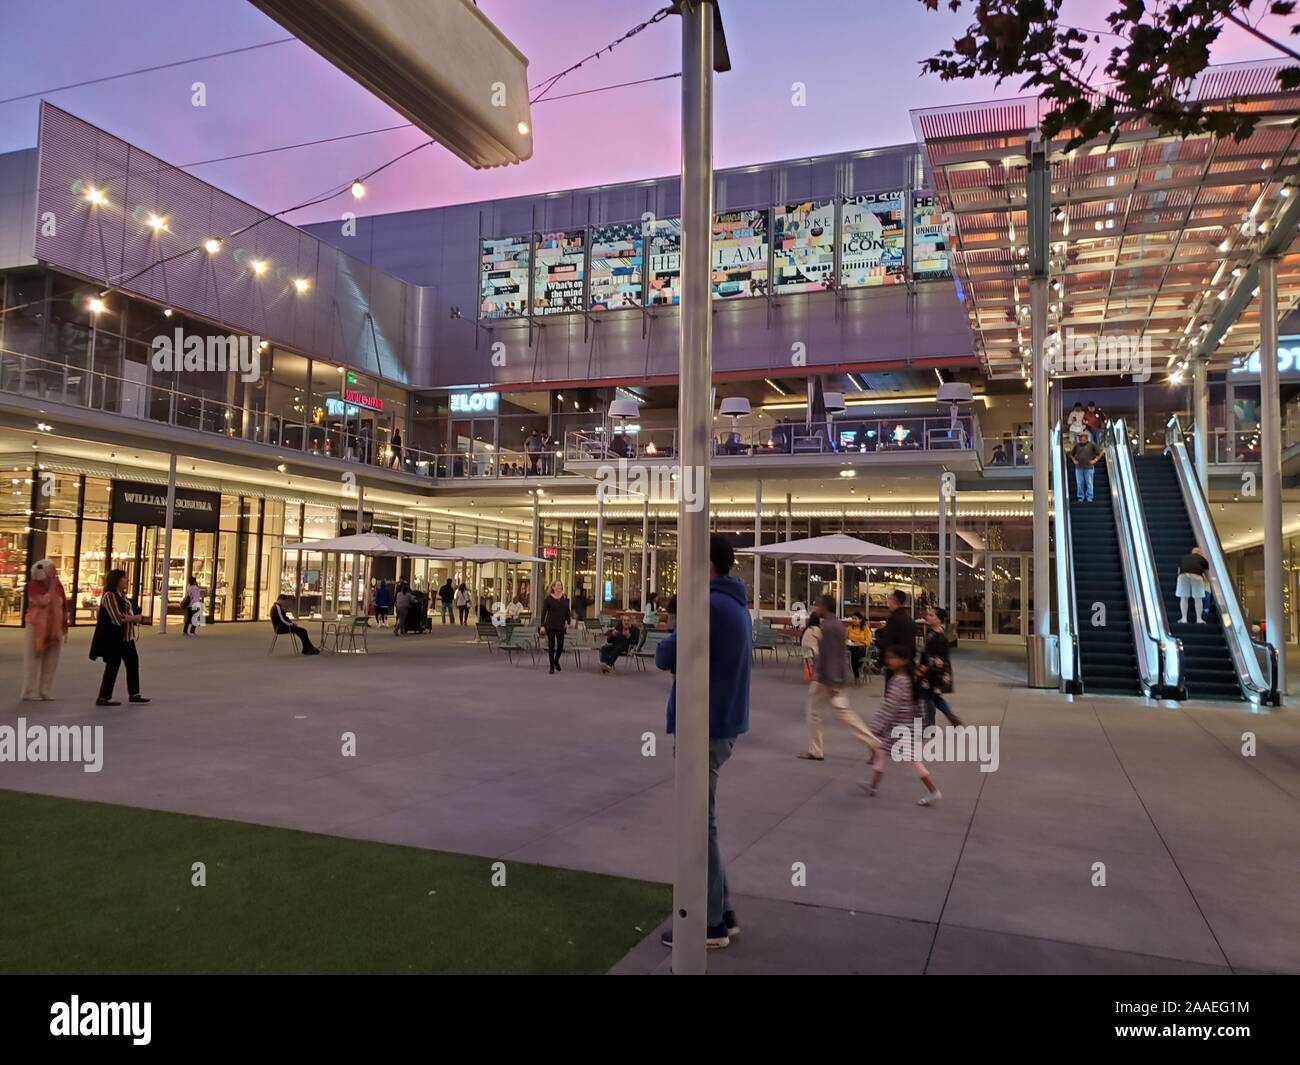 Night view of illuminated piazza at City Center Bishop Ranch, a project of famed Italian architect Renzo Piano in San Ramon, California, November 16, 2019. () Stock Photo